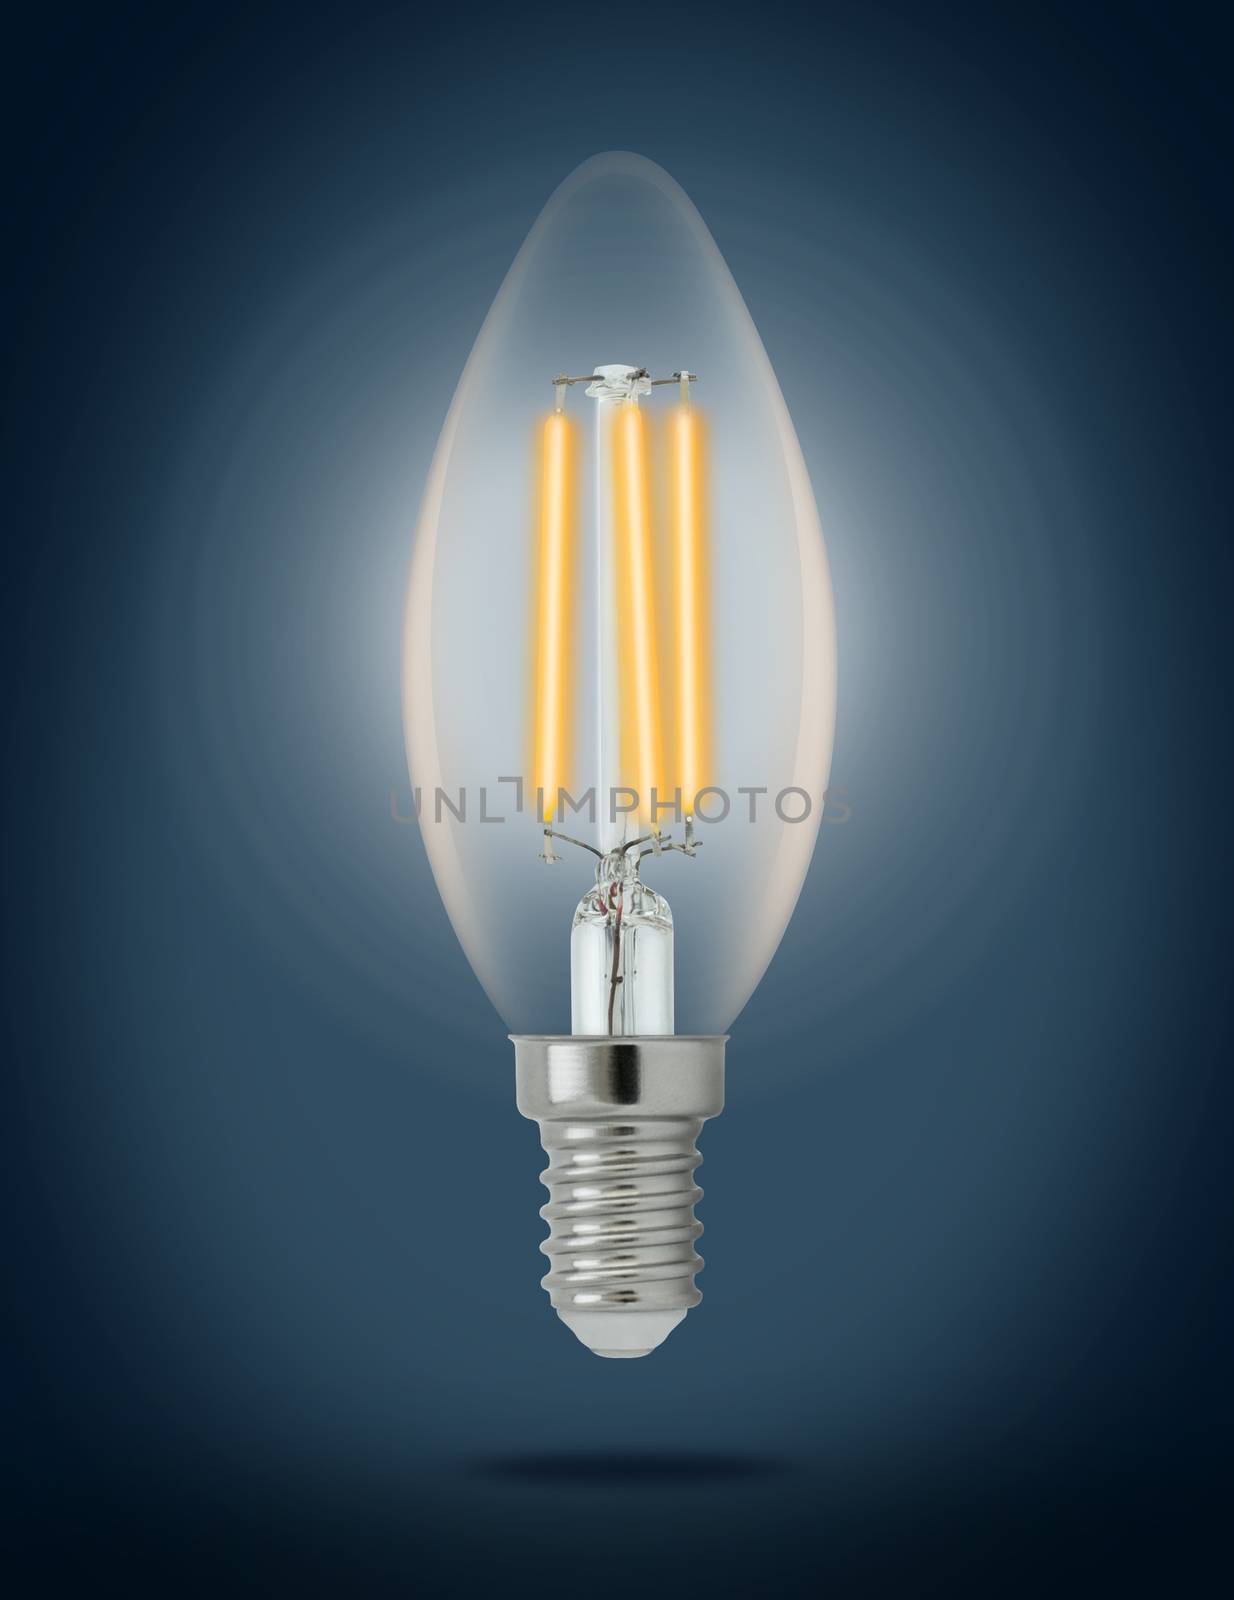 LED filament light bulb (E14). With clipping path